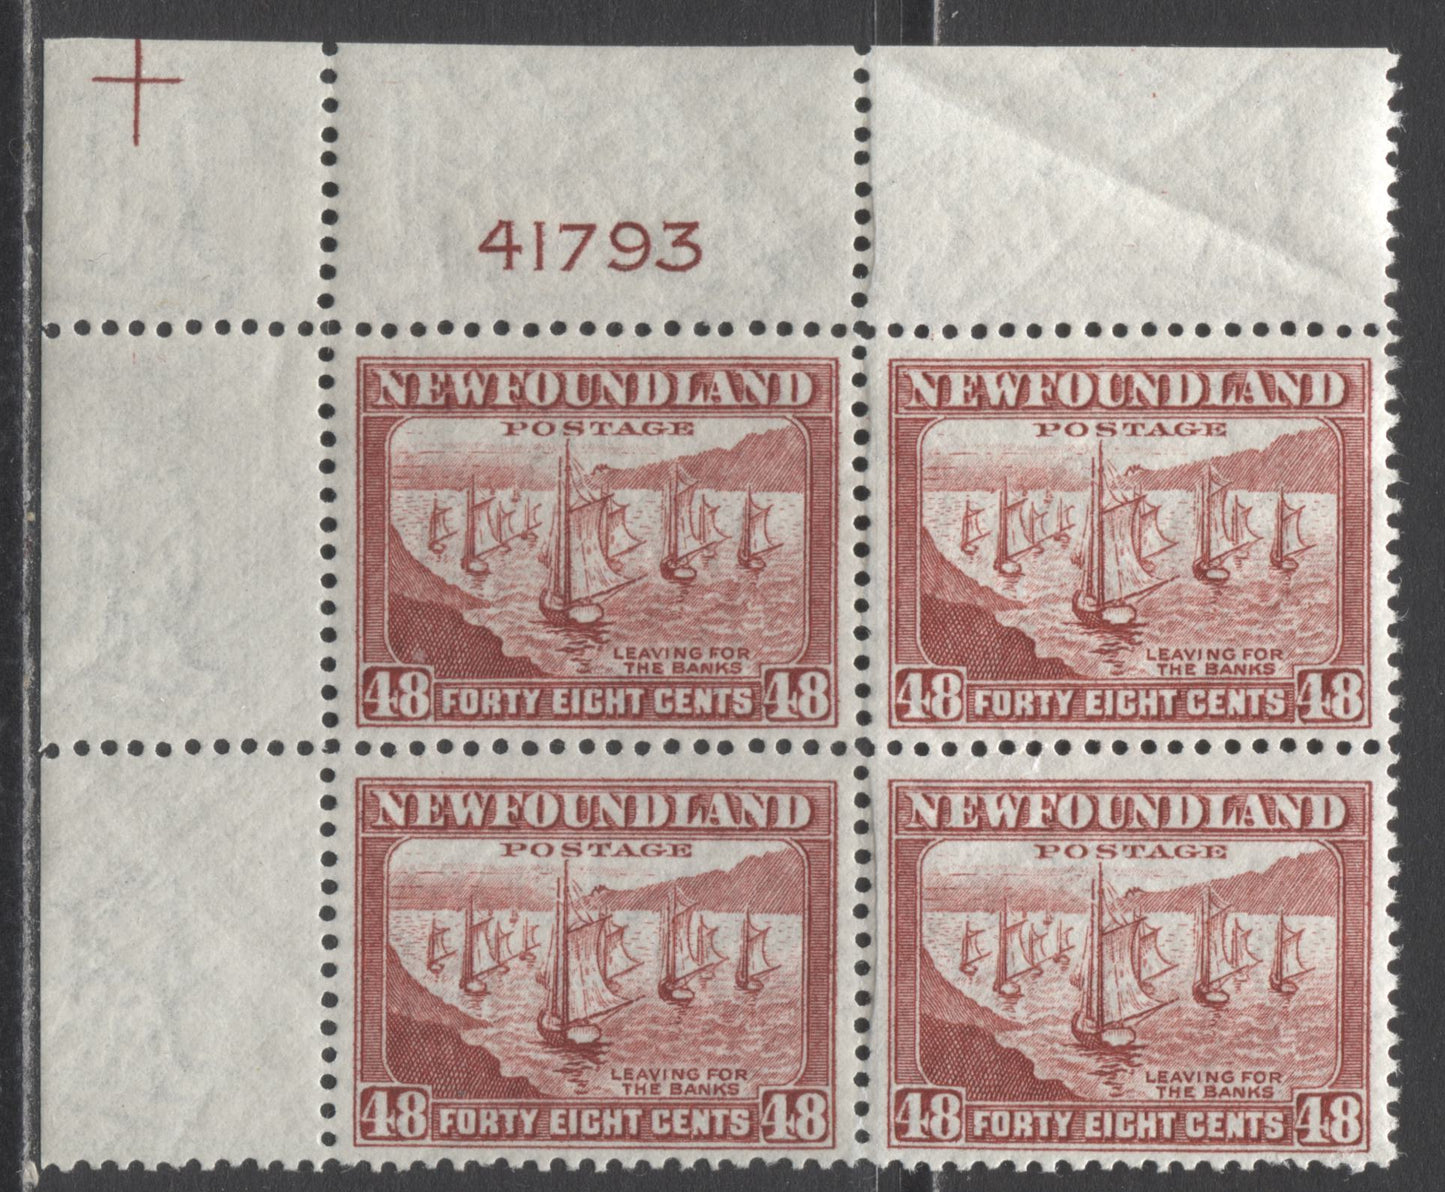 Lot 245 Newfoundland #266 48c Red Brown Fishing Fleet, 1941-1944 Resources Re-Issue, A VFNH UL Plate 41793 Block Of 4